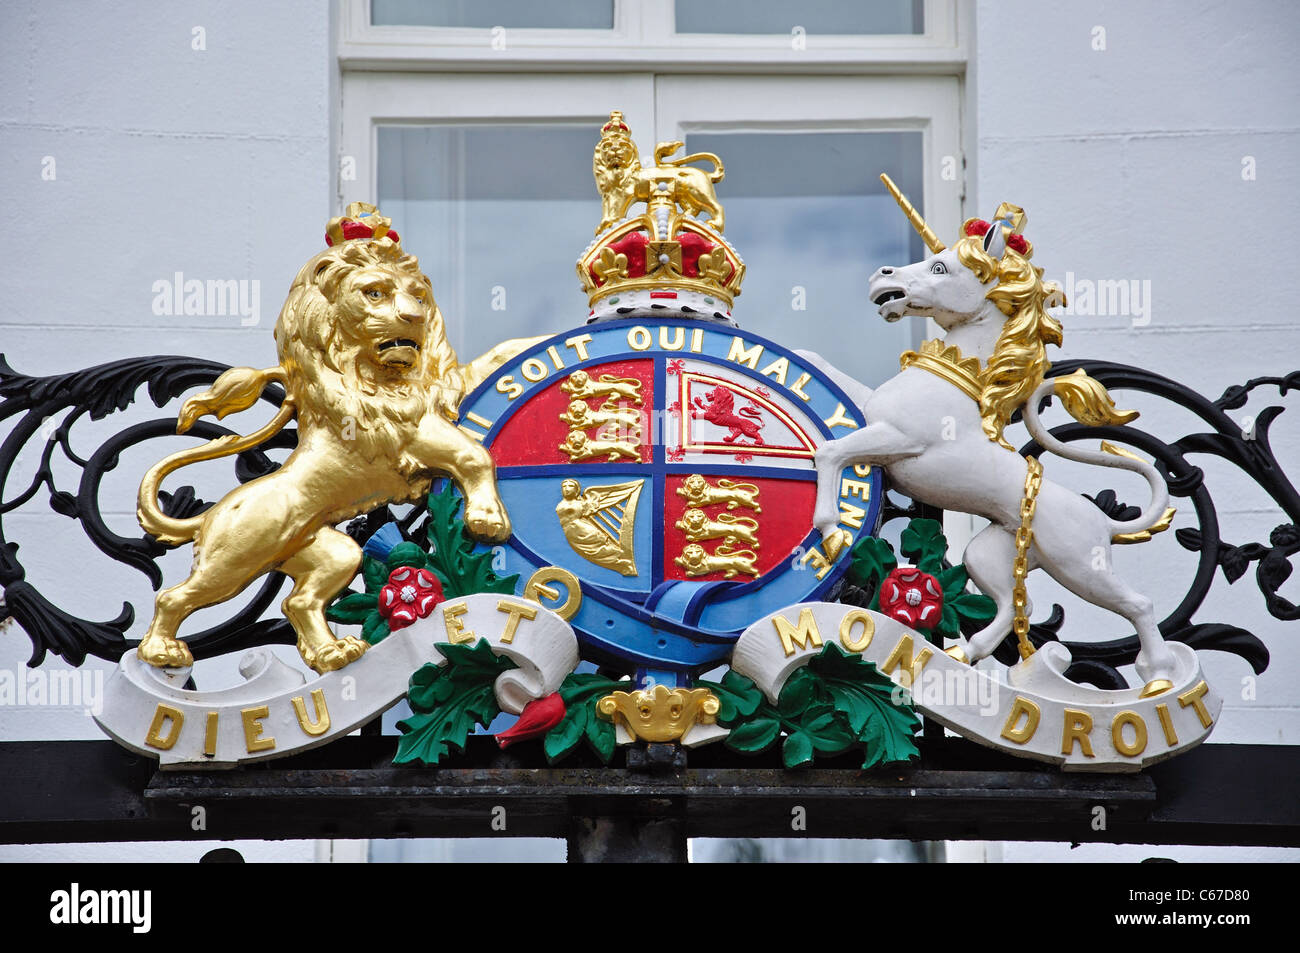 The Royal coat of arms of the United Kingdom, Cathedral Close, Exeter, Devon, England, United Kingdom Stock Photo